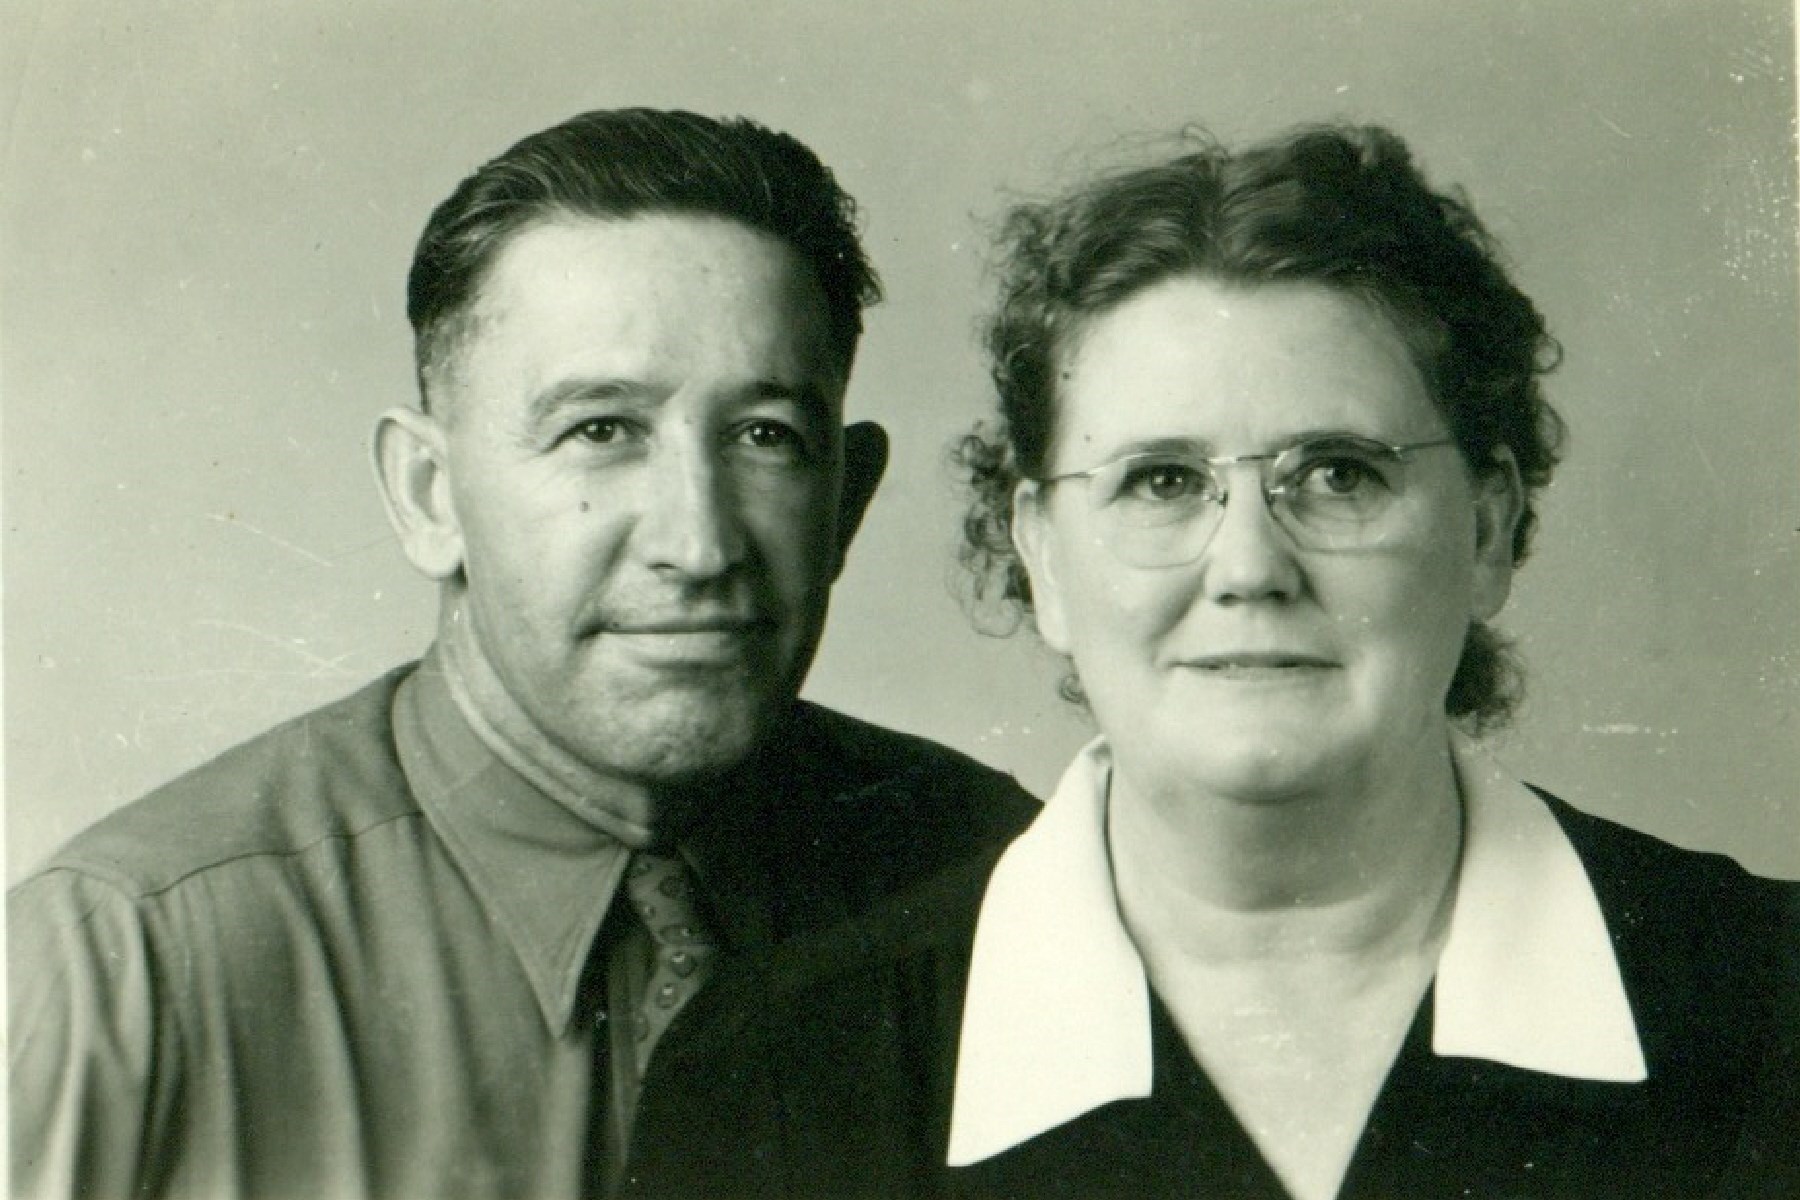 Henry and Alice - identified as Aunt and Uncle - abt 1942